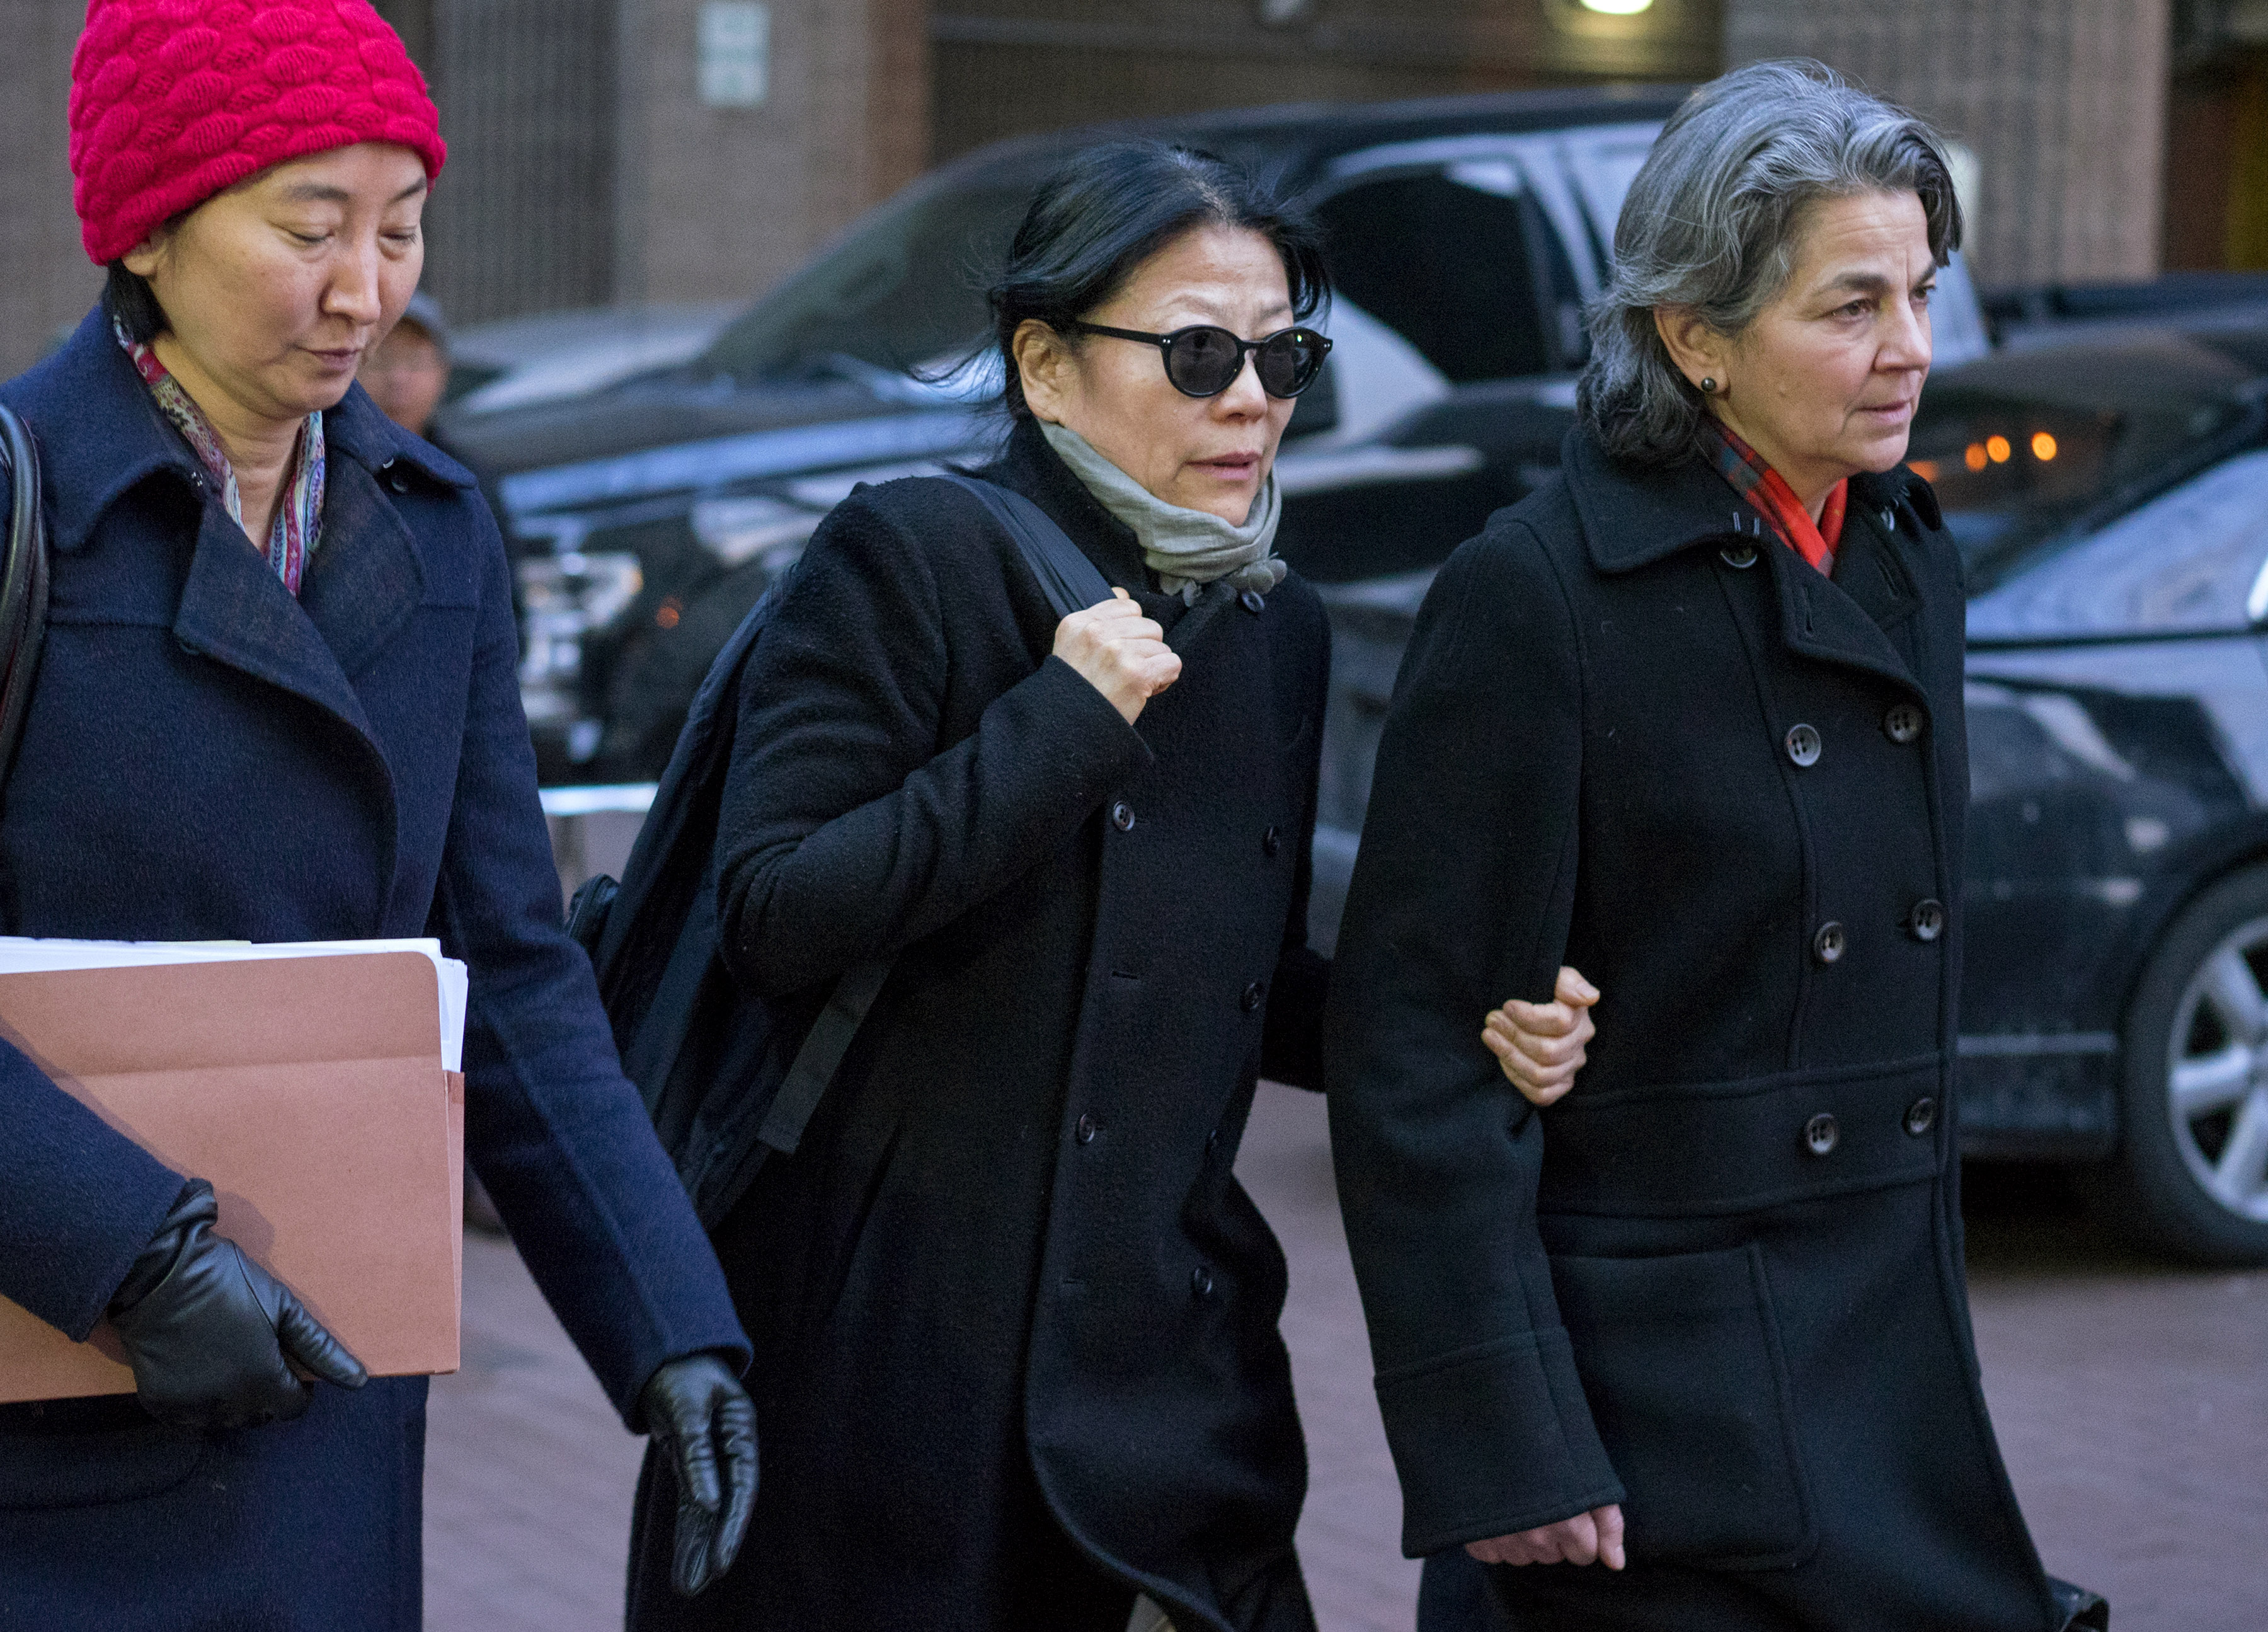 Shiwei Yan, CEO of Global Sustainability Foundation, center, leaves federal court in New York after she plead guilty in connection with a scheme to bribe ex-UN General Assembly President John Ashe on Jan. 20, 2016. (Craig Ruttle—AP)